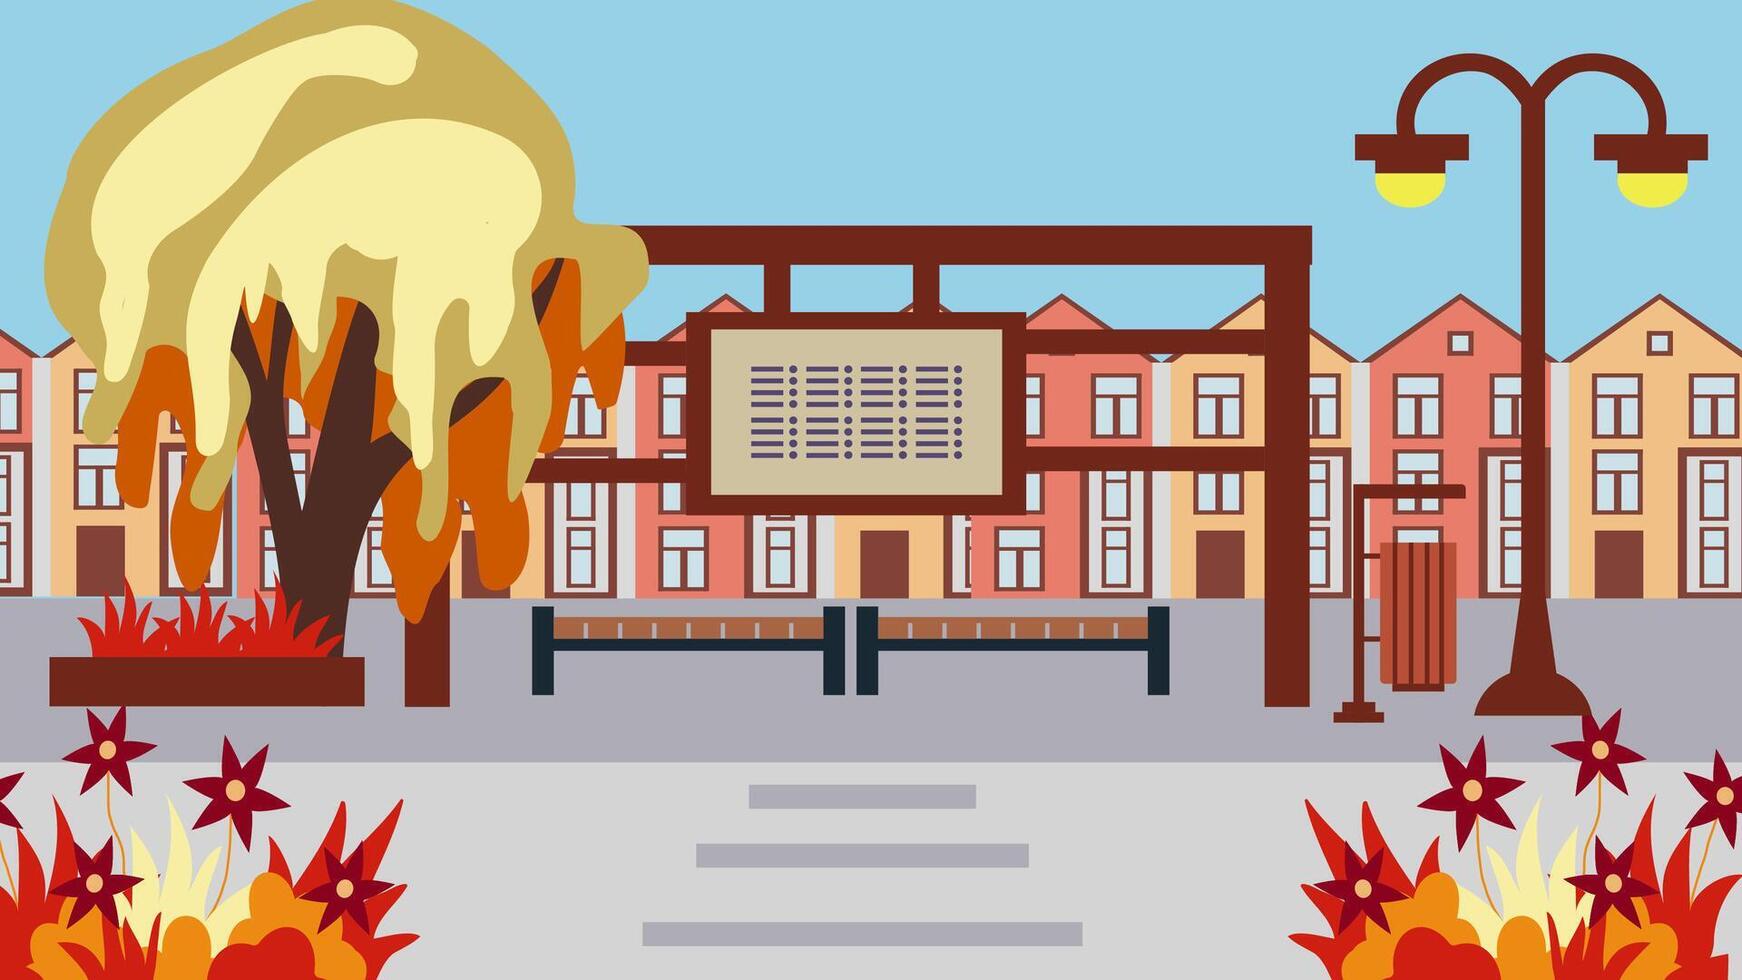 Bus stop on the background of an autumn city, cottage village, illustration in a flat cartoon style. vector